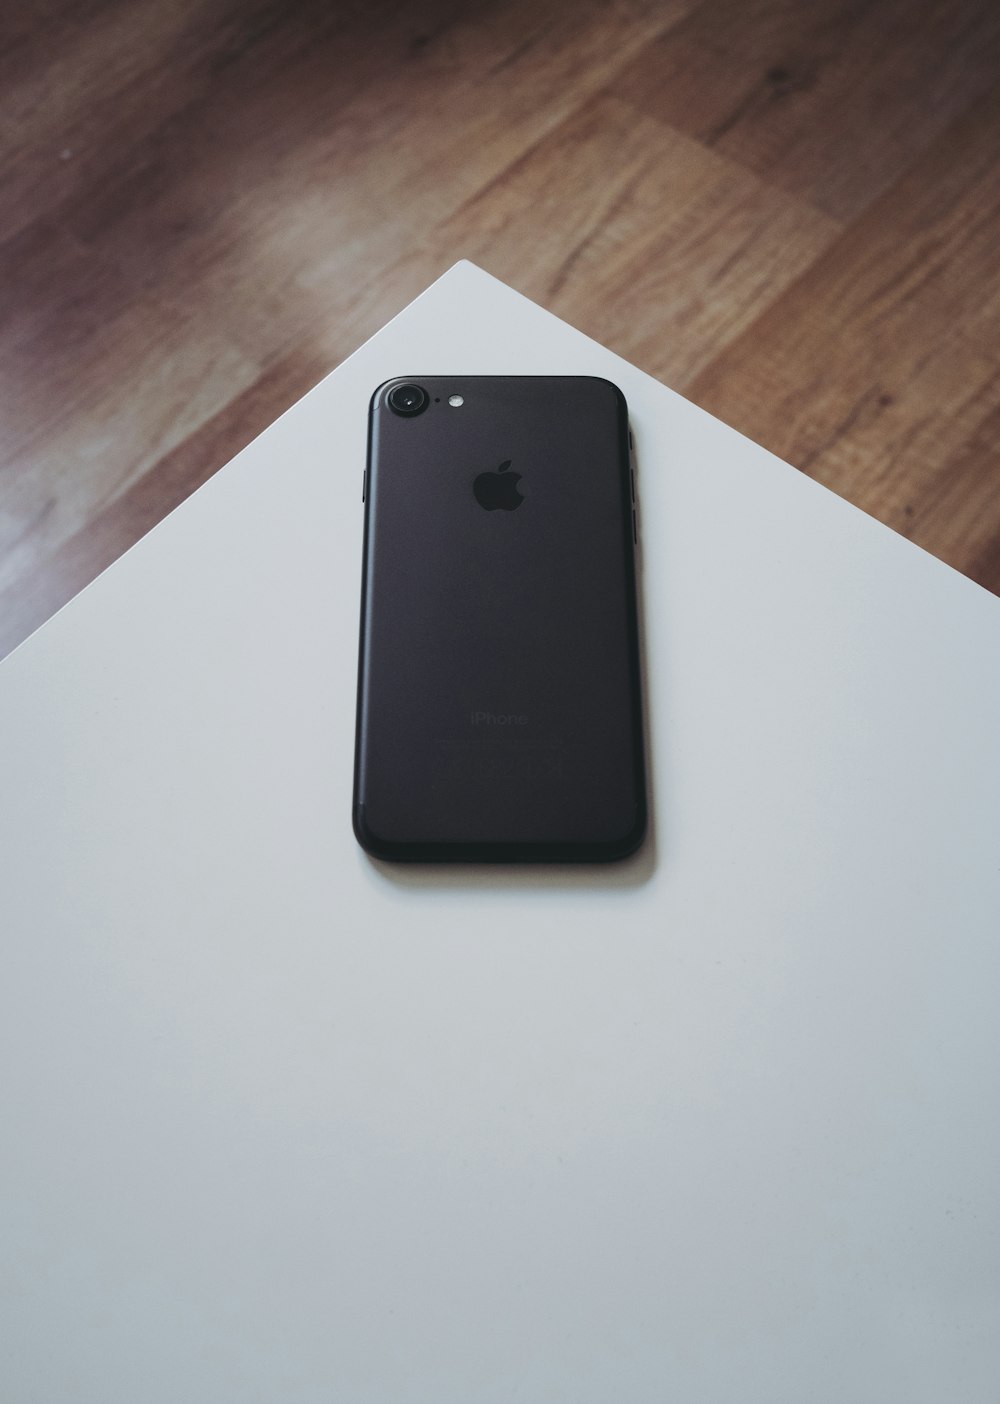 black iPhone 7 on white wooden table